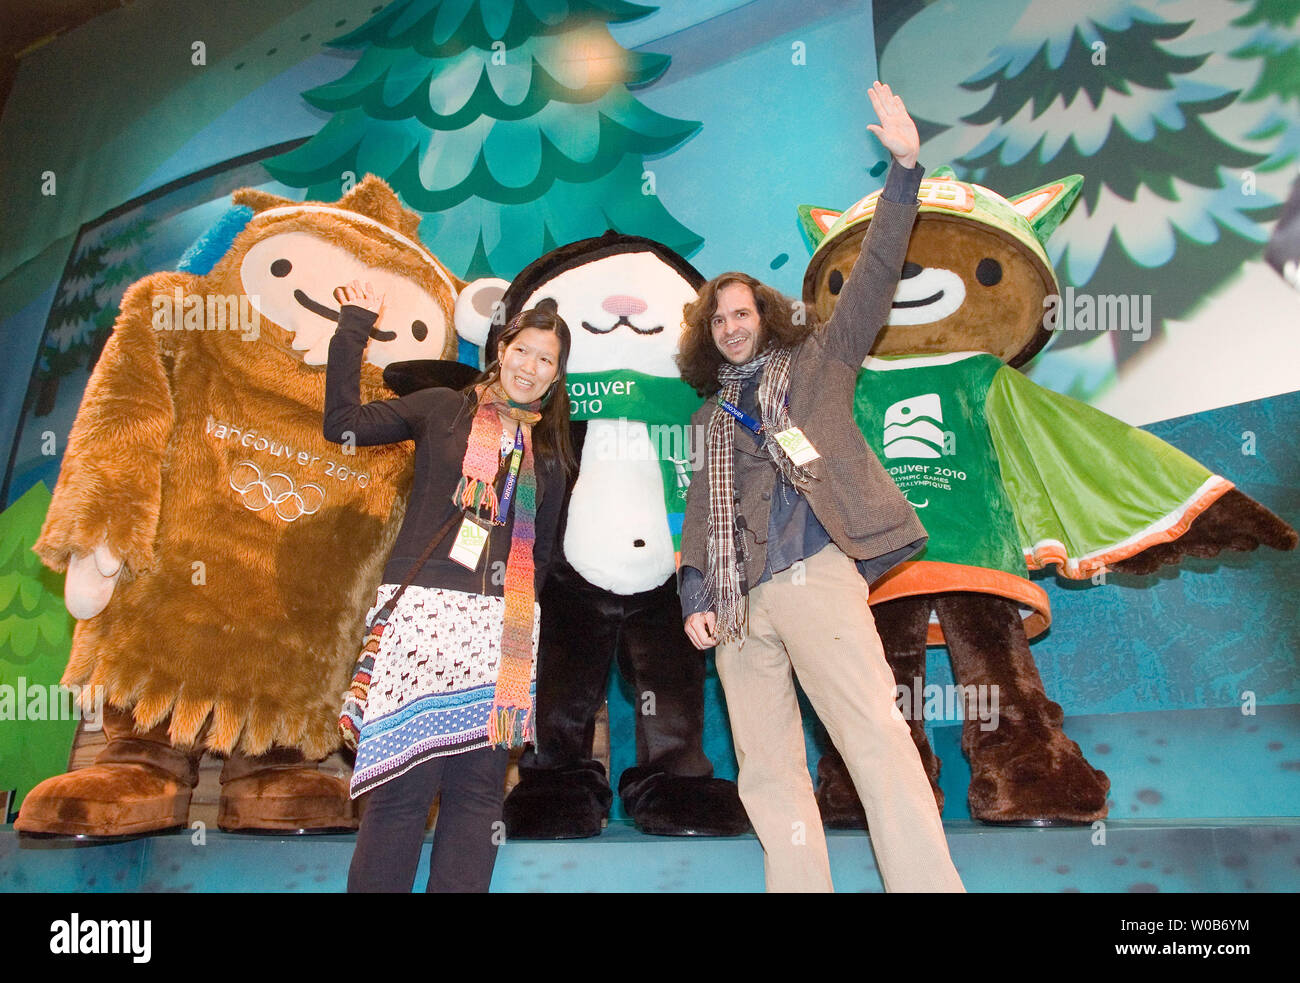 The 2010 Winter Olympic Mascot design winners Vicki Wong (L) and Michael Murphy of Meomi Design wave in front of their creations Quatchi (L), Miga and Sumi (R) at their unveiling in Surrey near Vancouver, British Columbia, November 27, 2007. Miga is a sea bear which according to First Nations legend is an orca whale which can turn into the rare white Kermode bear only found in British Columbia. Quatchi is a sasquatch described in many West Coast First Nations stories but rarely seen. Sumi is an animal gaurdian spirit who wears the hat of an orca, has the strong leags of the black bear and flie Stock Photo